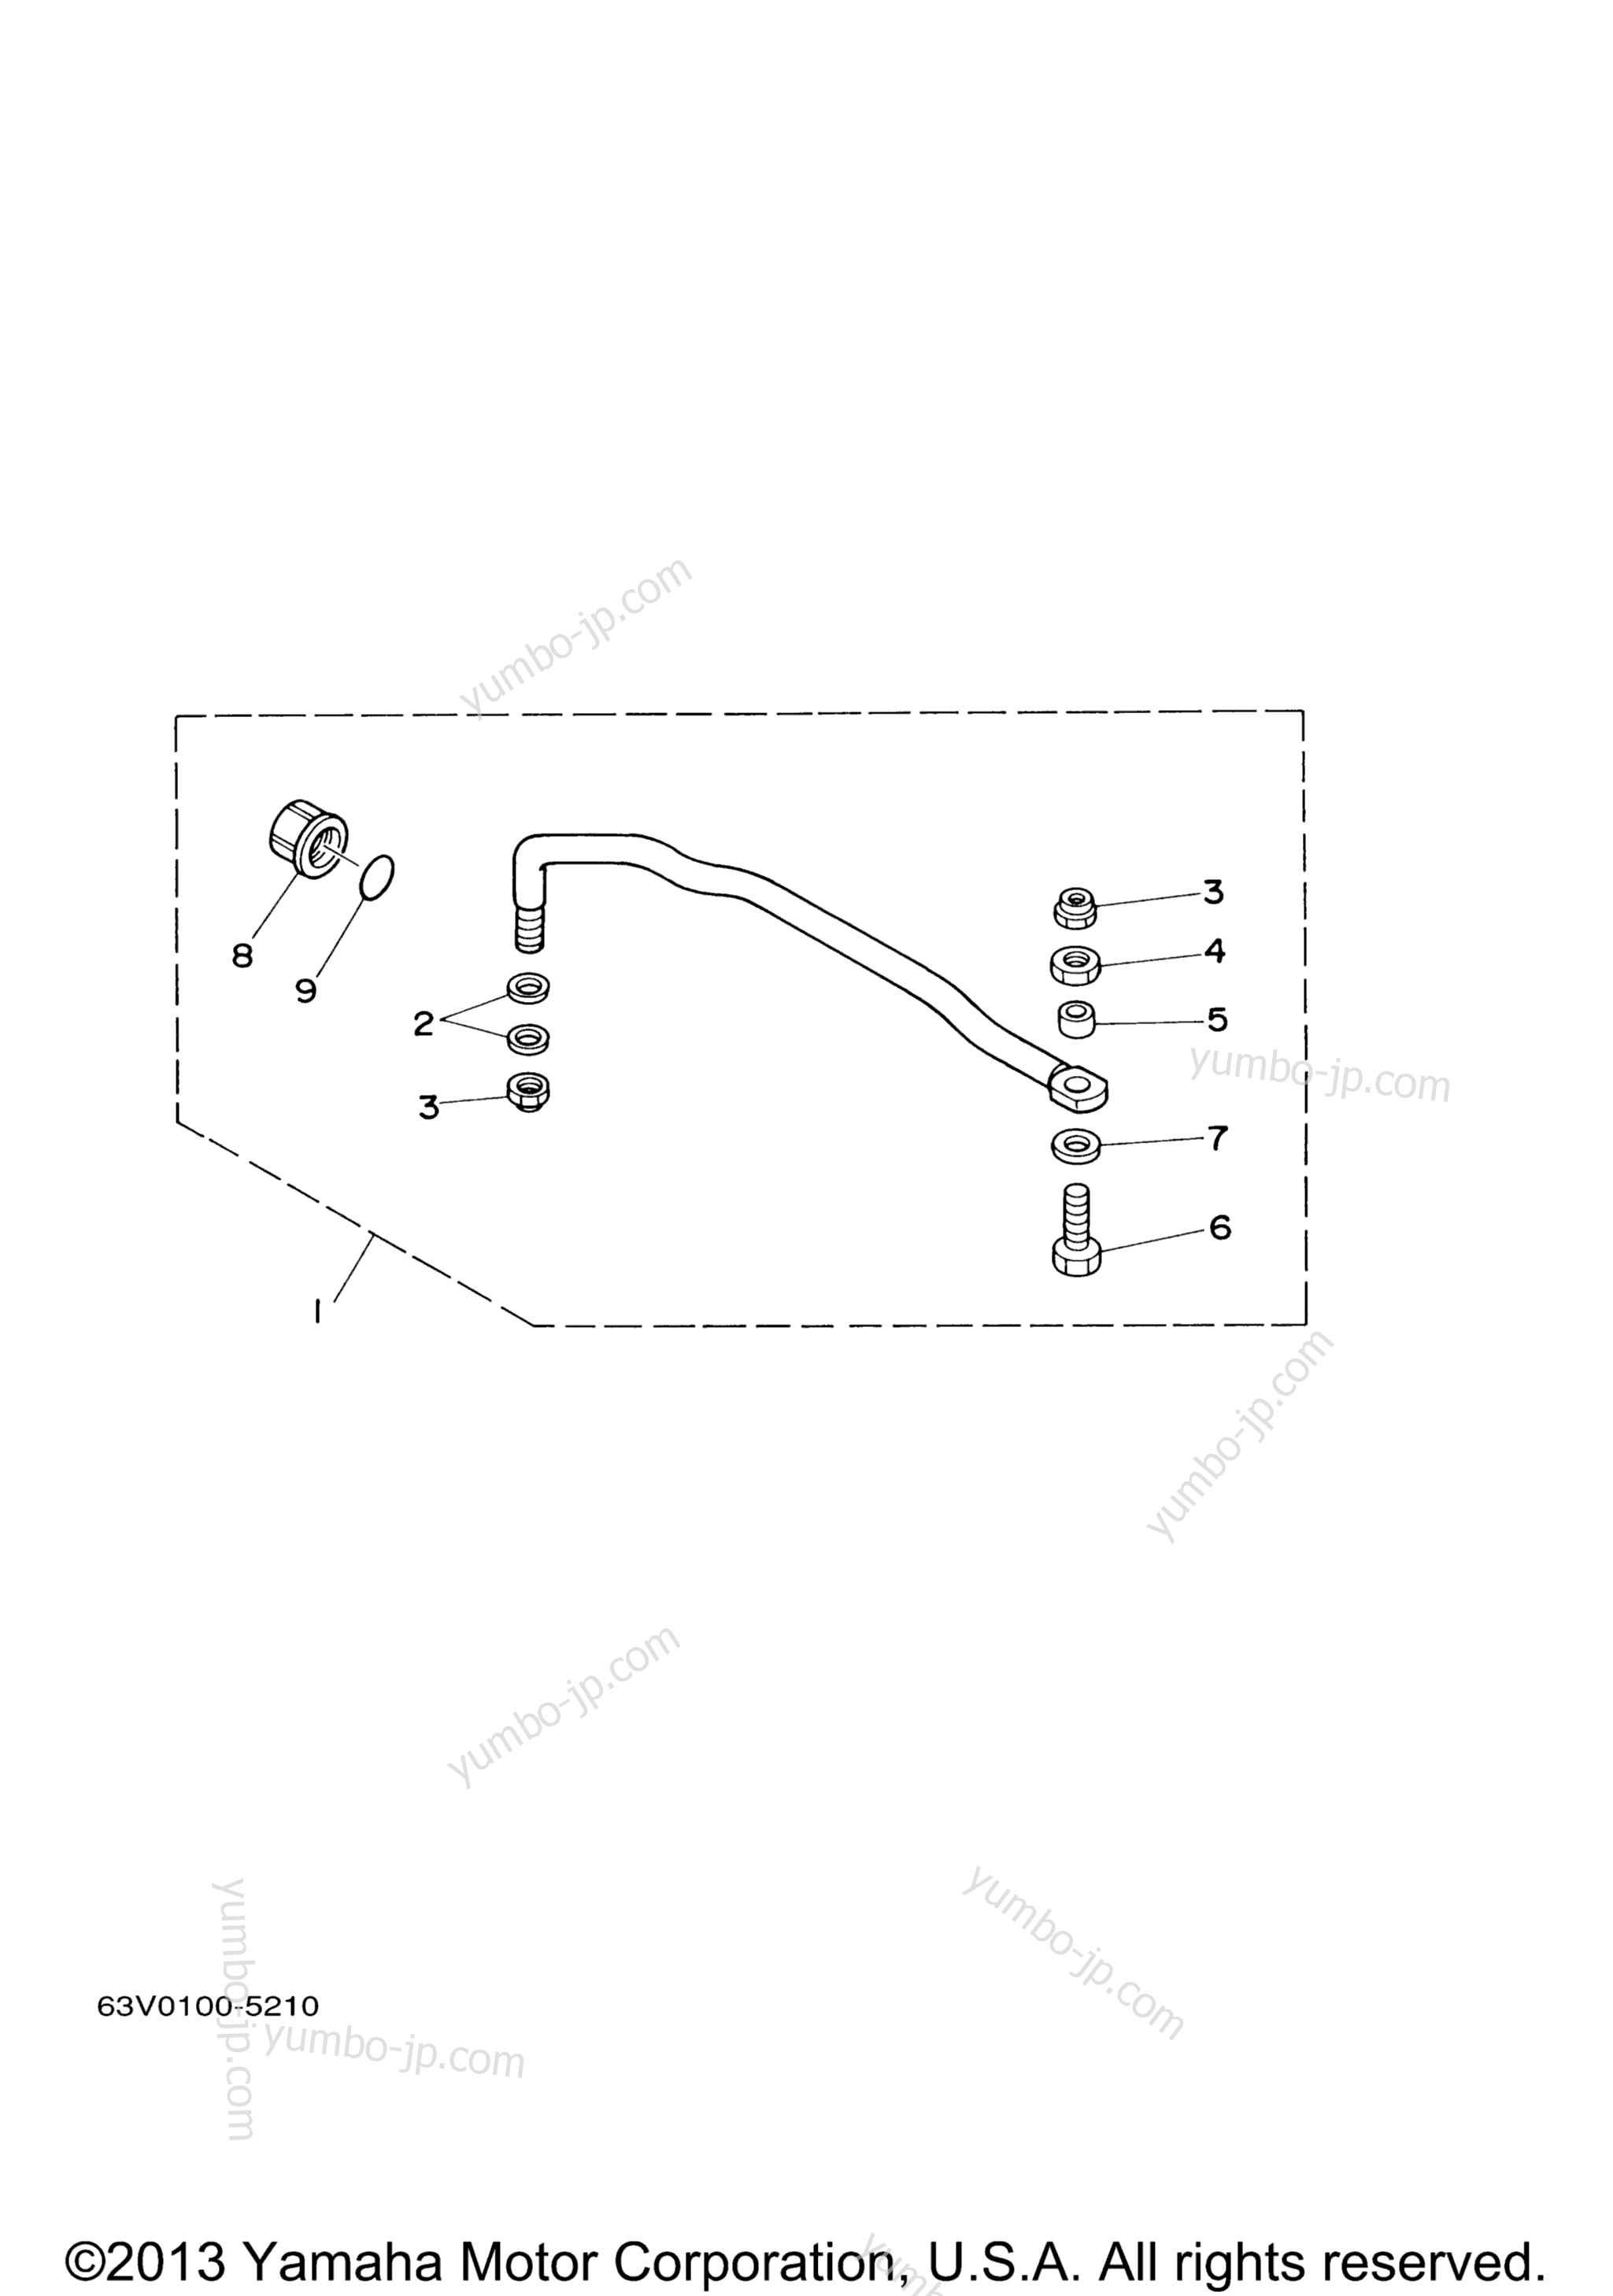 Steering Guide for outboards YAMAHA F9.9ELR2K (0405) 66N-1004576~1005500 F9.9MSH2_MLH2_ELR2 66NK-100000 2006 year